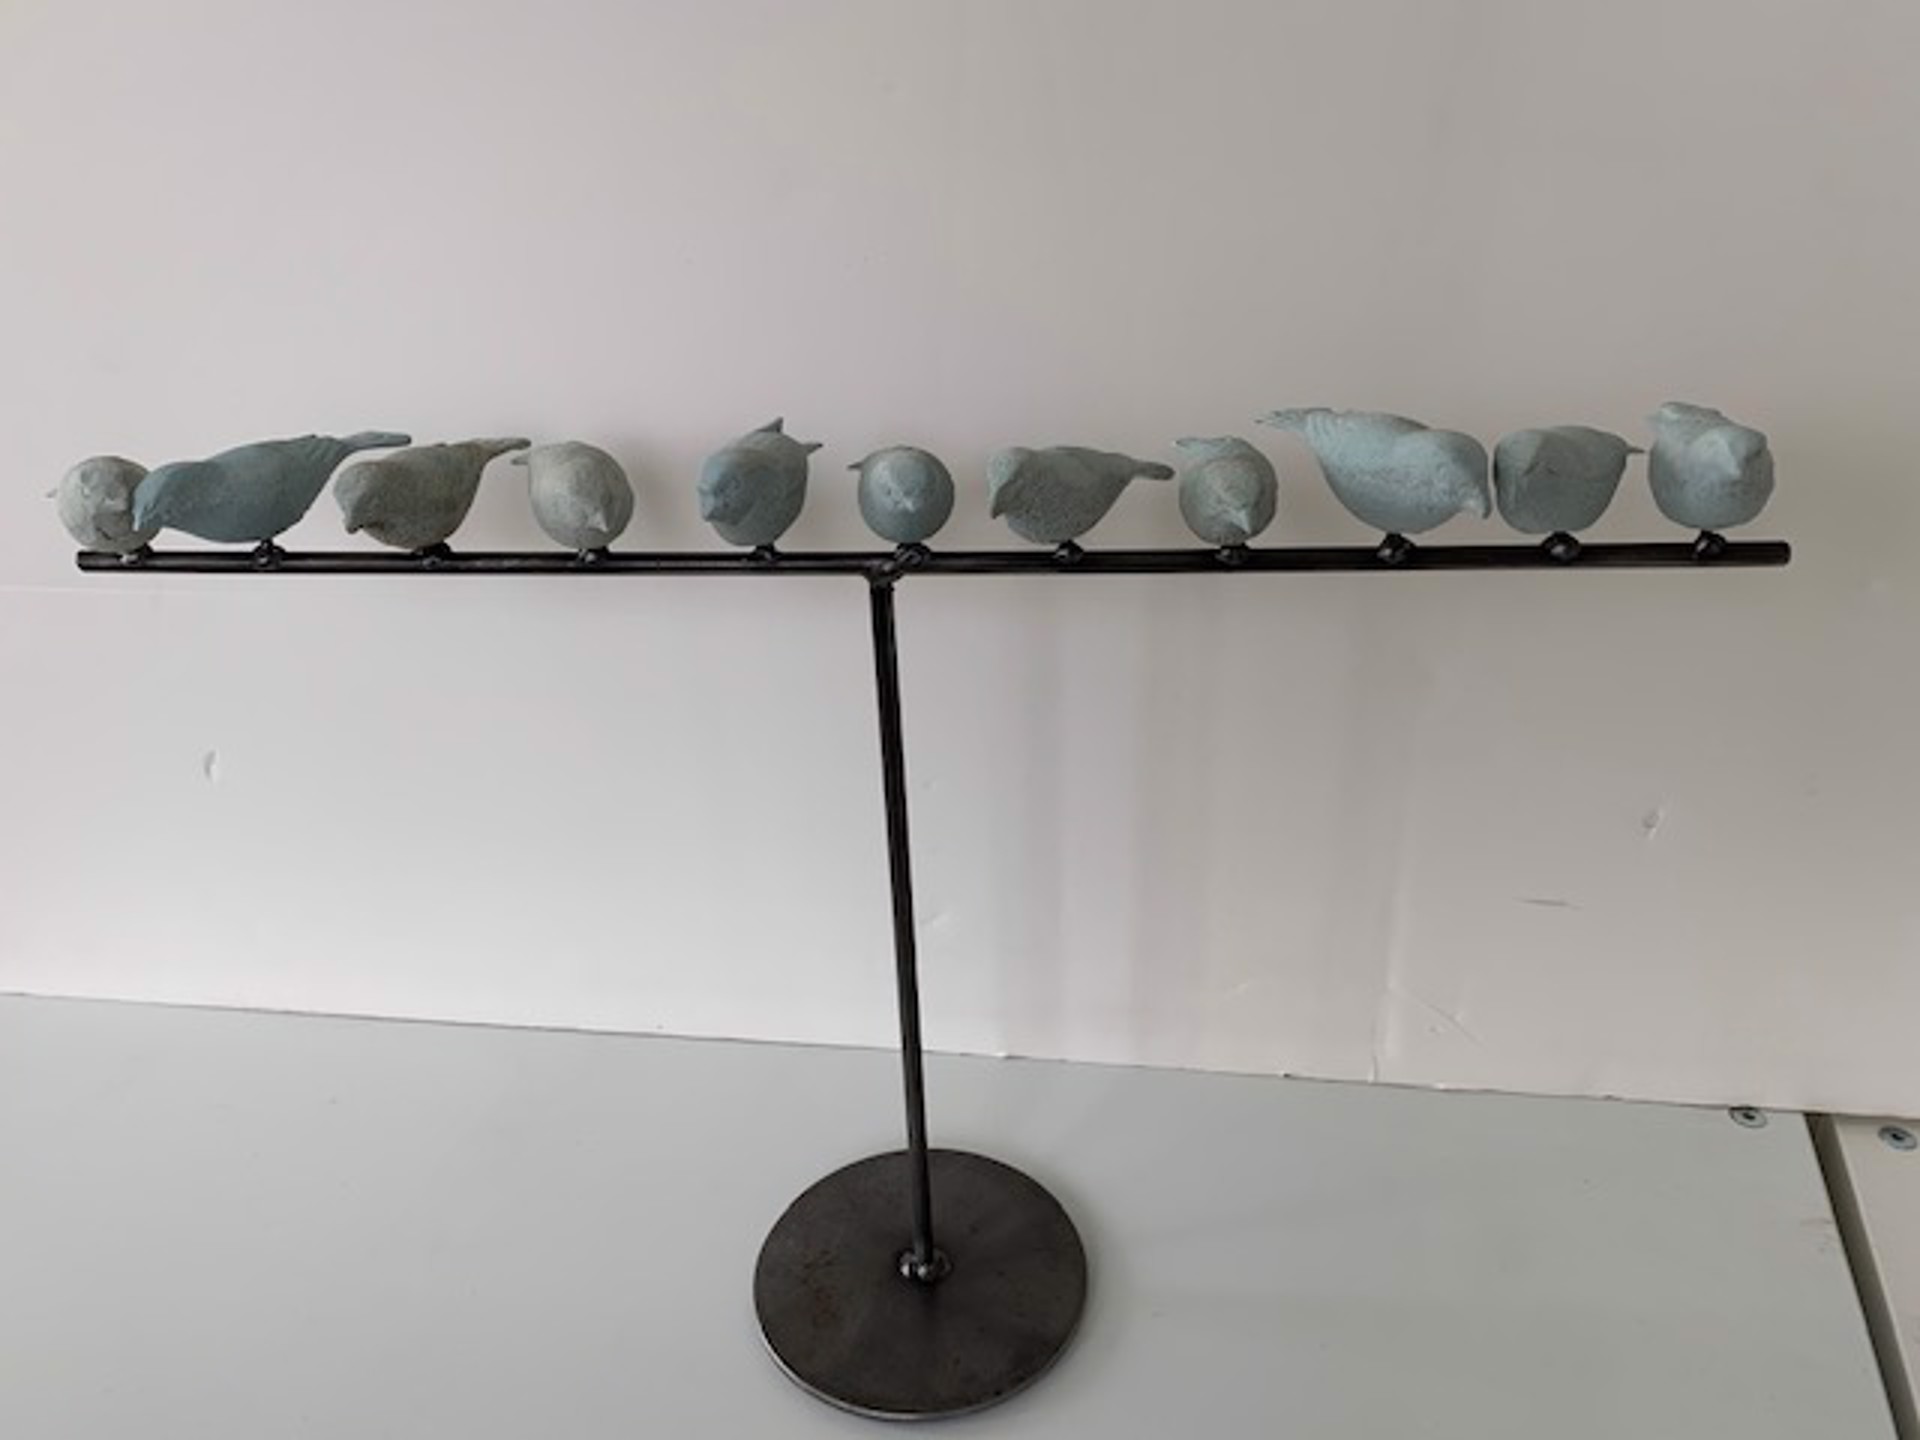 SOLD - 11 Birds on a Stand by Rory Burke